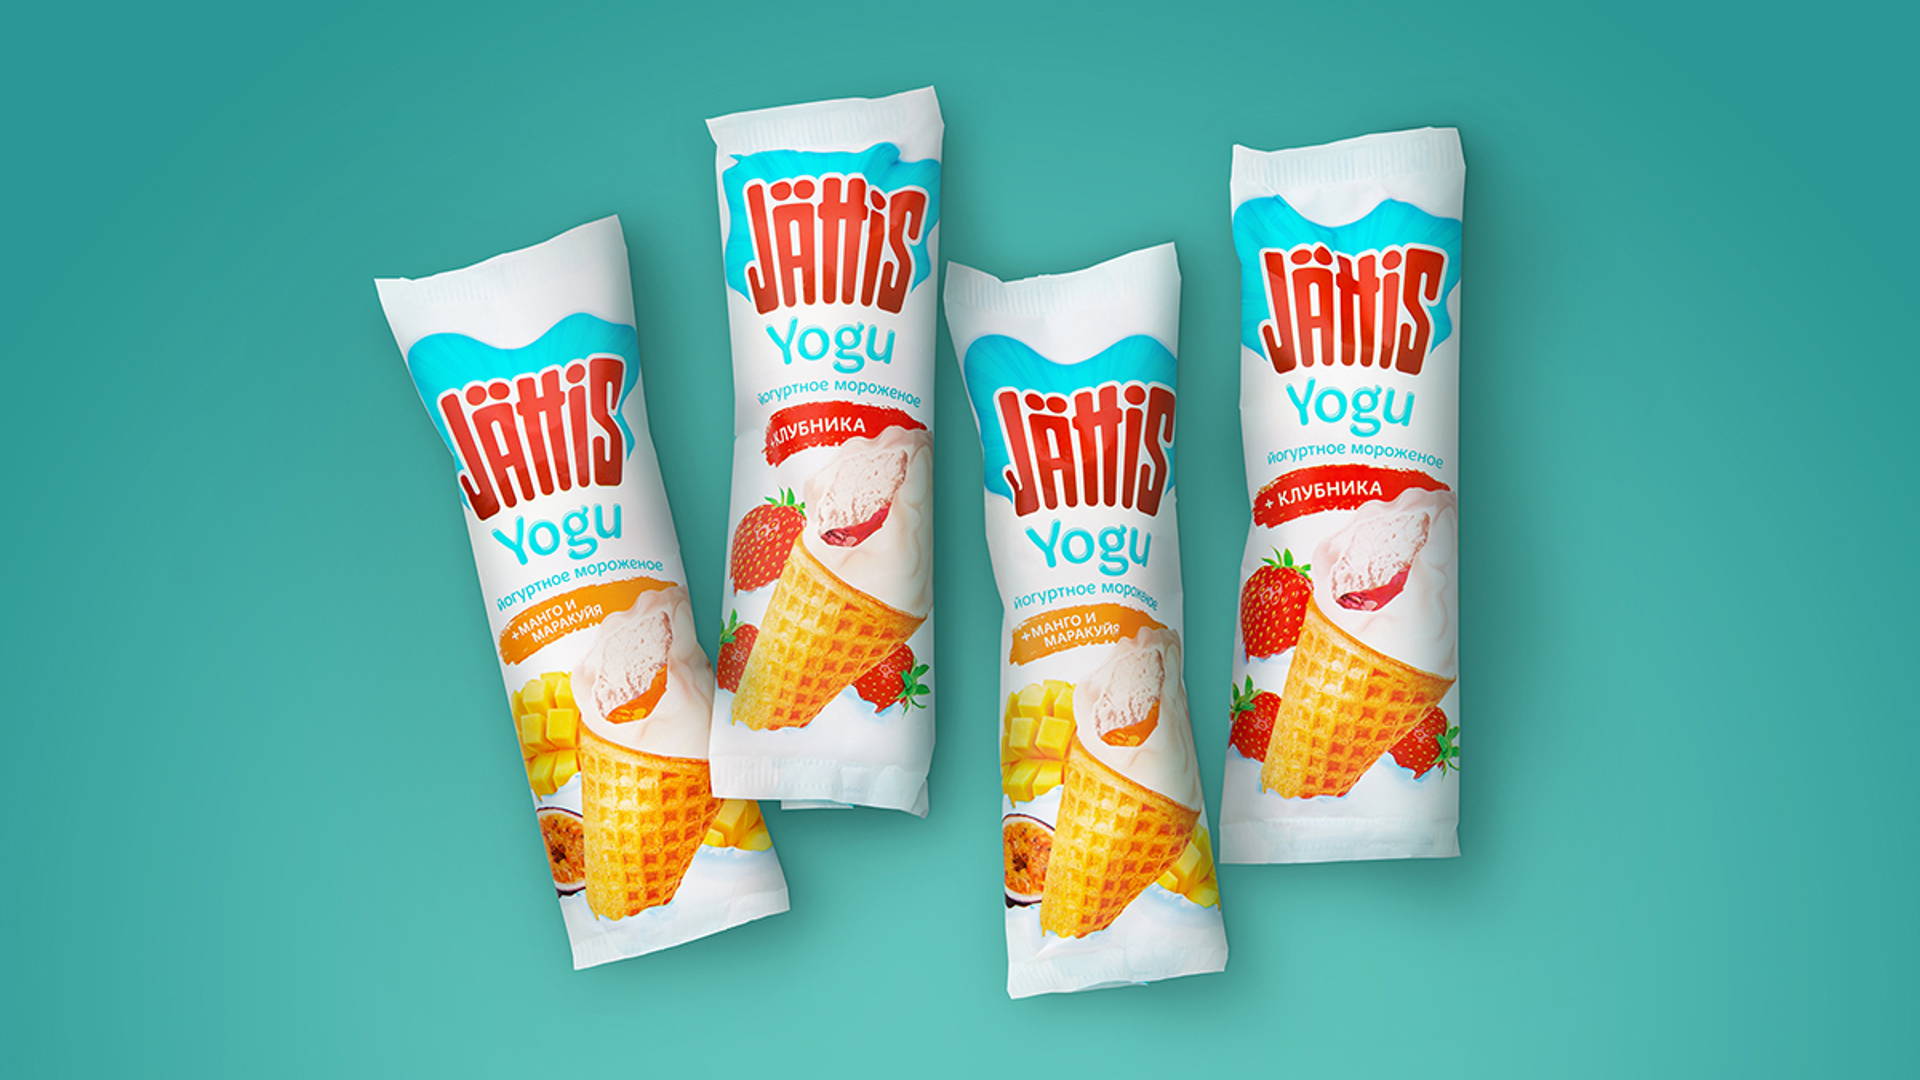 Featured image for Jattis is a New Healthy Ice Cream That Is Sure to Capture Consumers' Attention